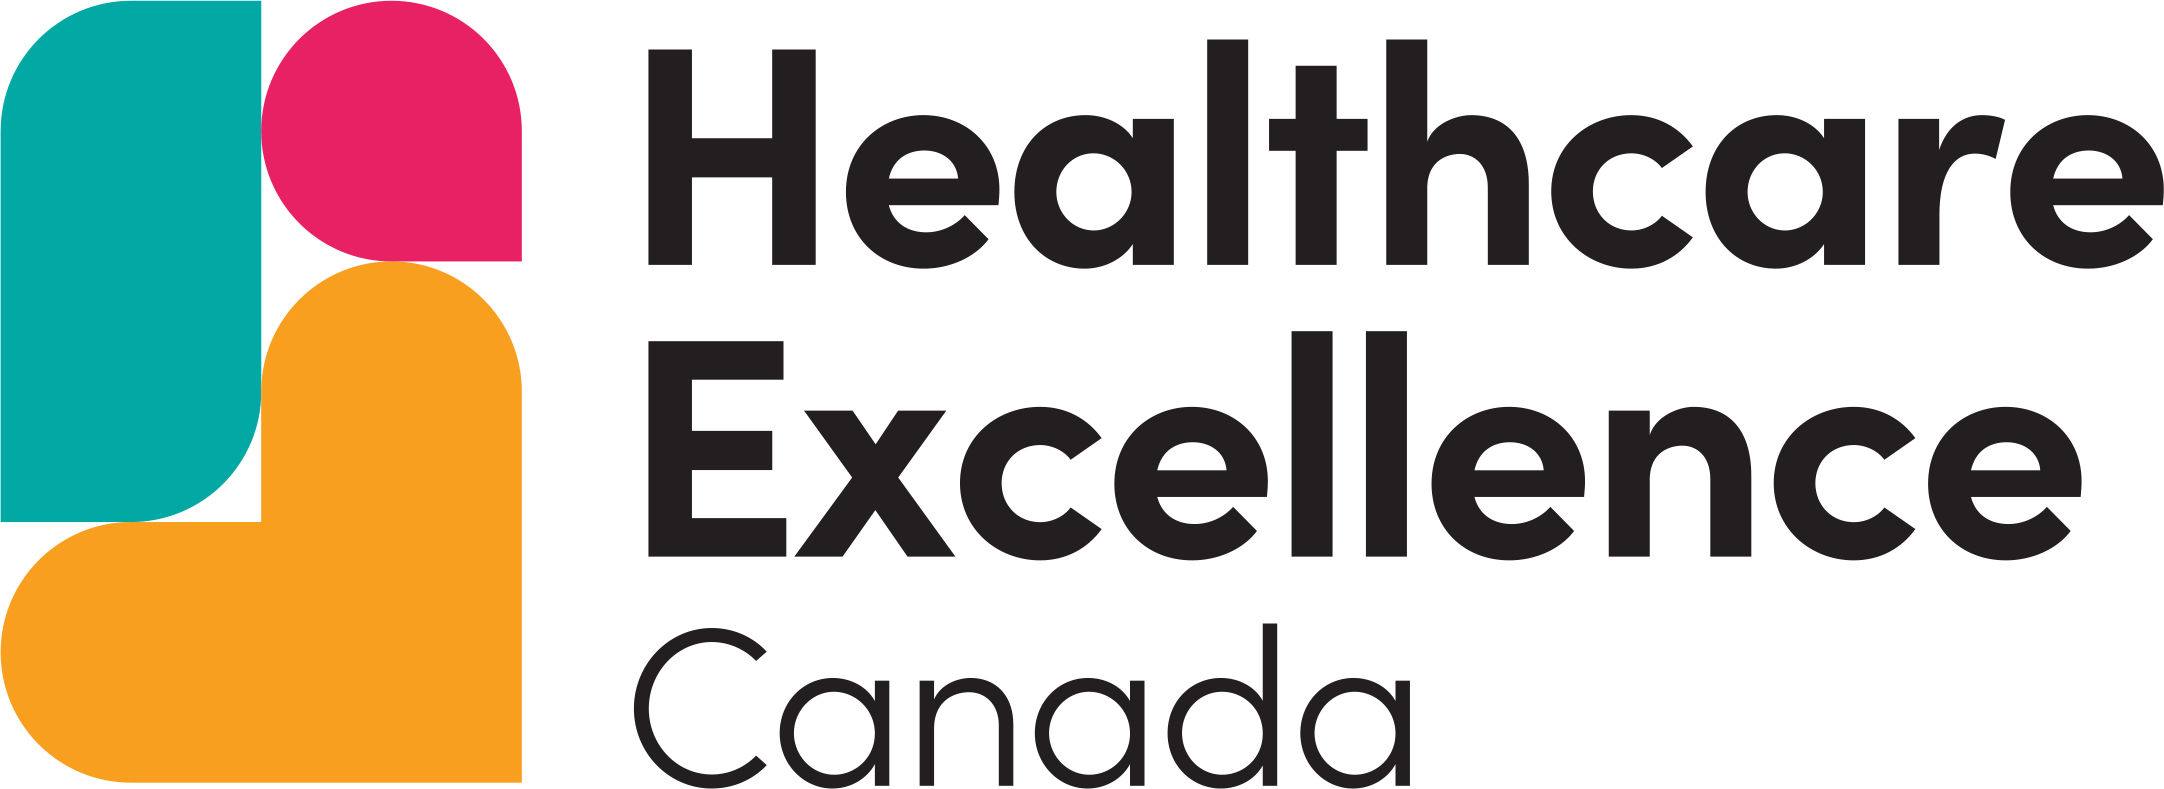 Health care Excellence Canada